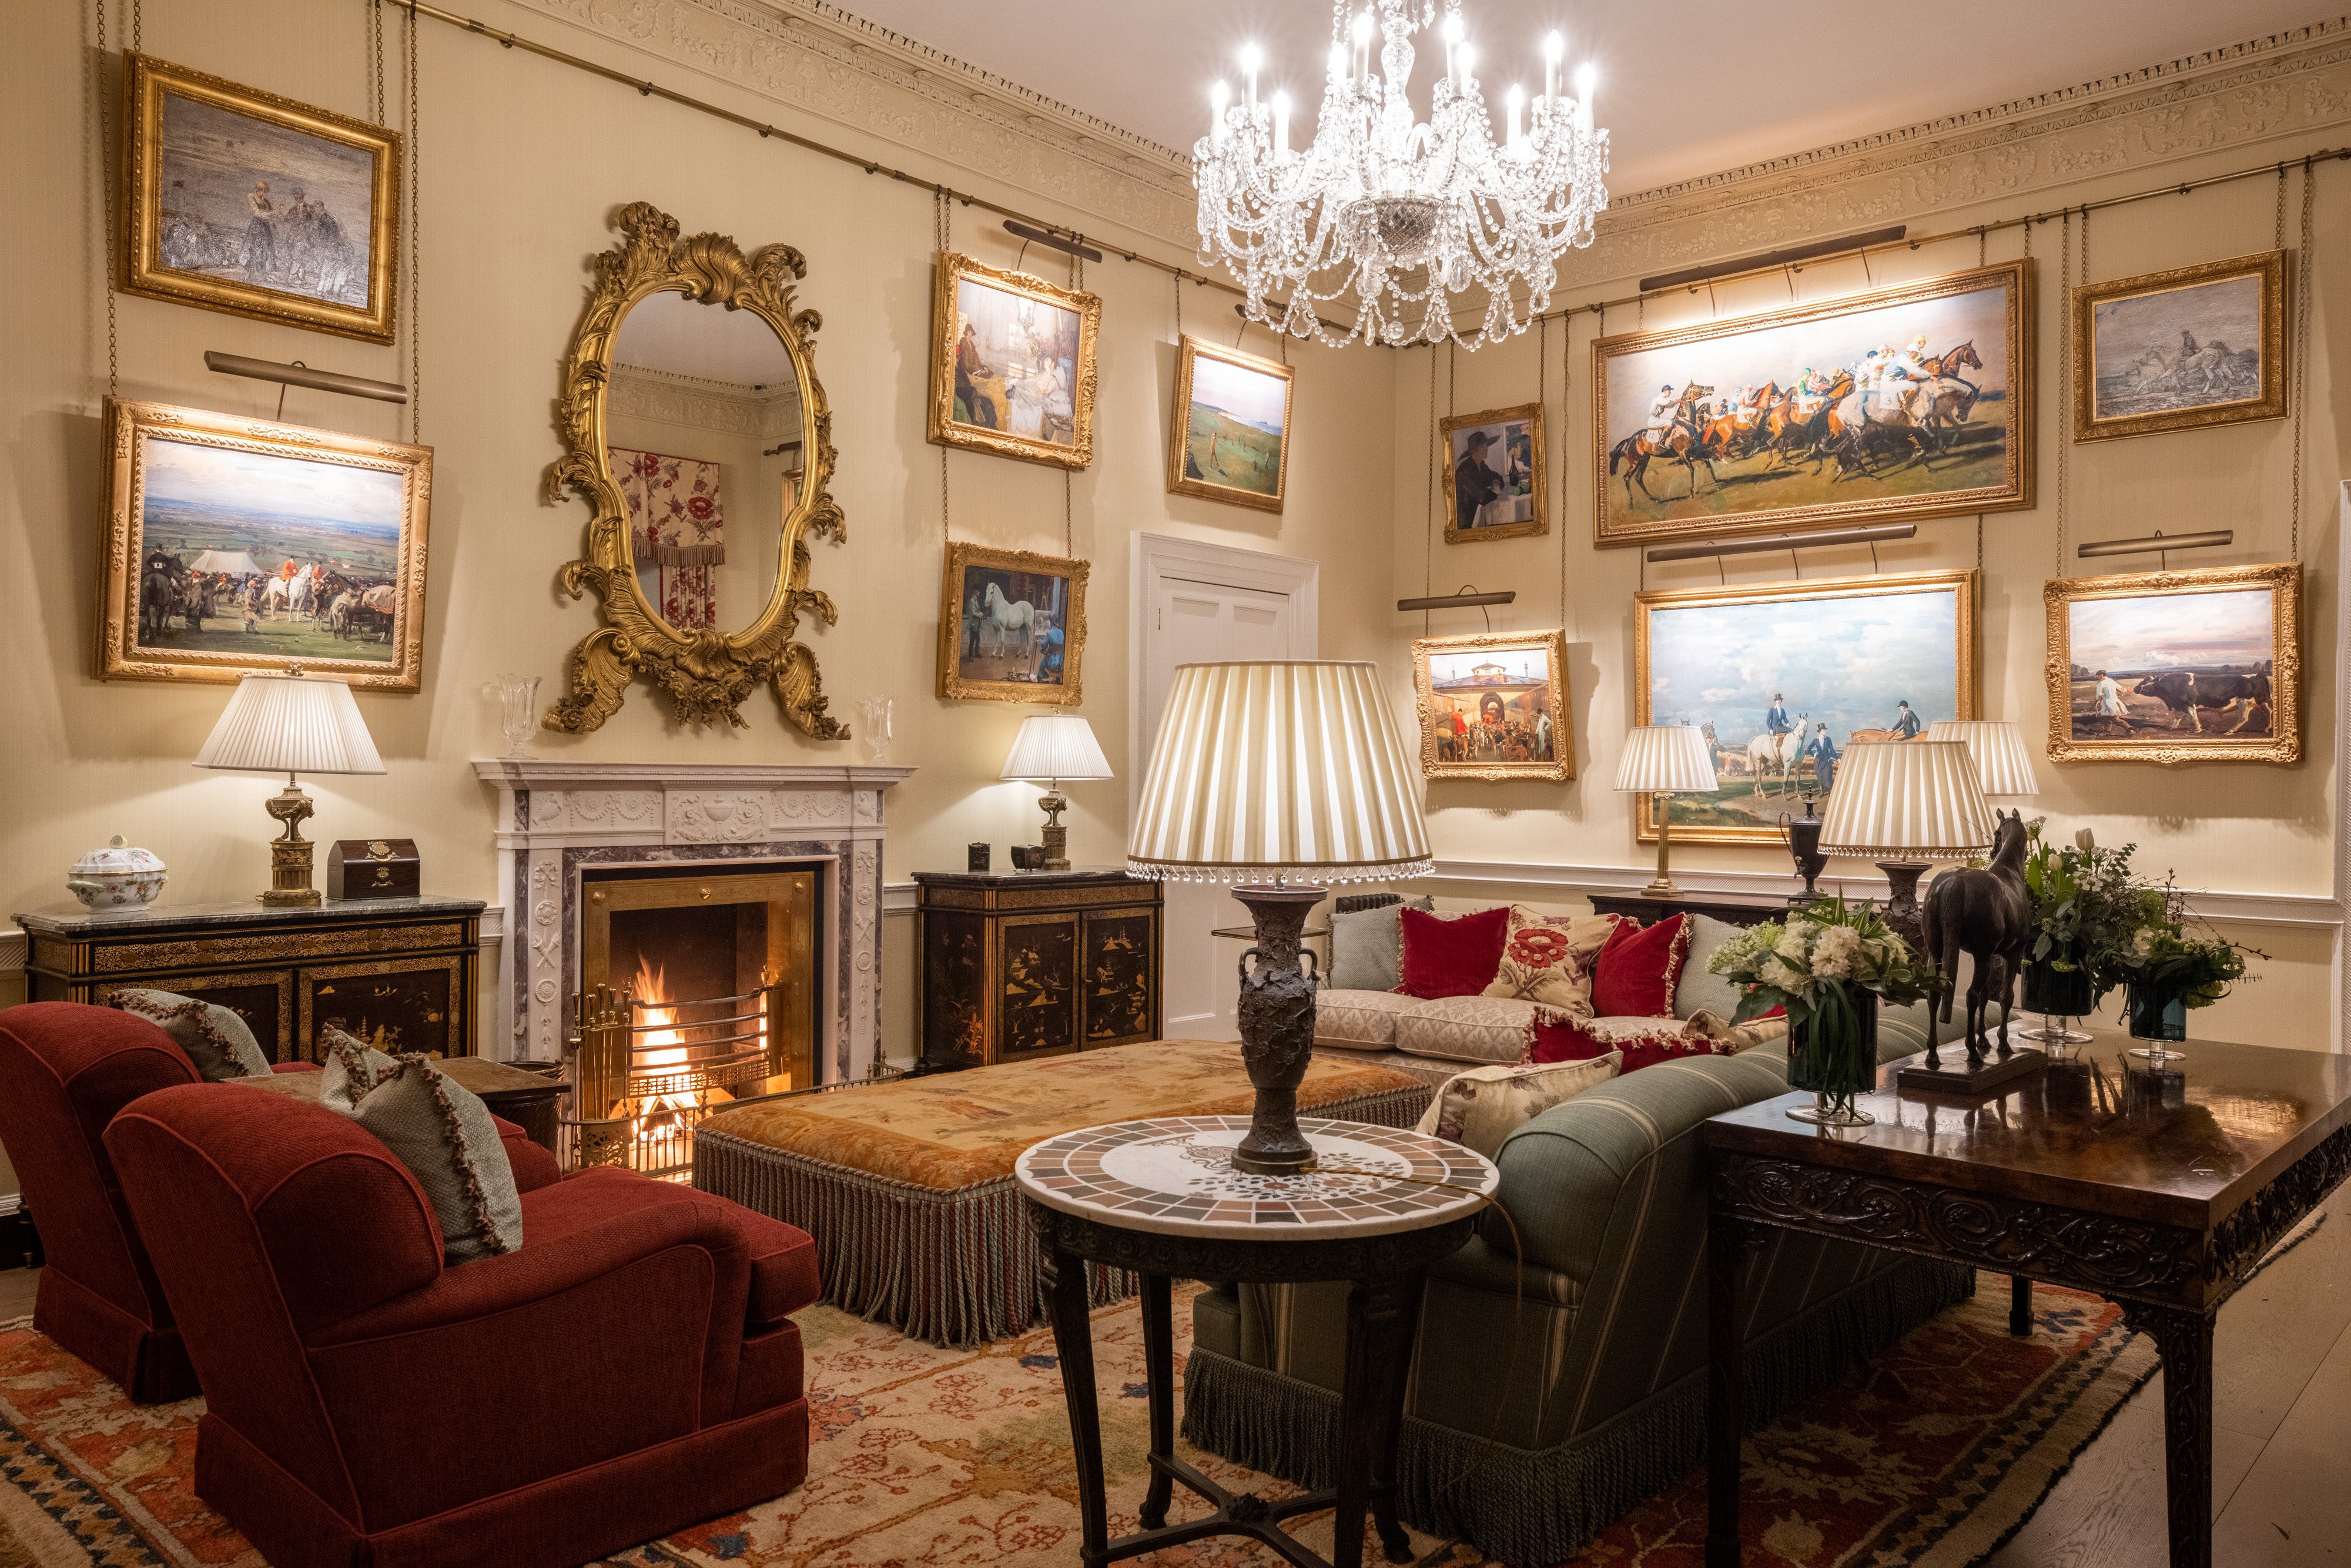 The elegant glamour of the drawing room at Cashel Palace